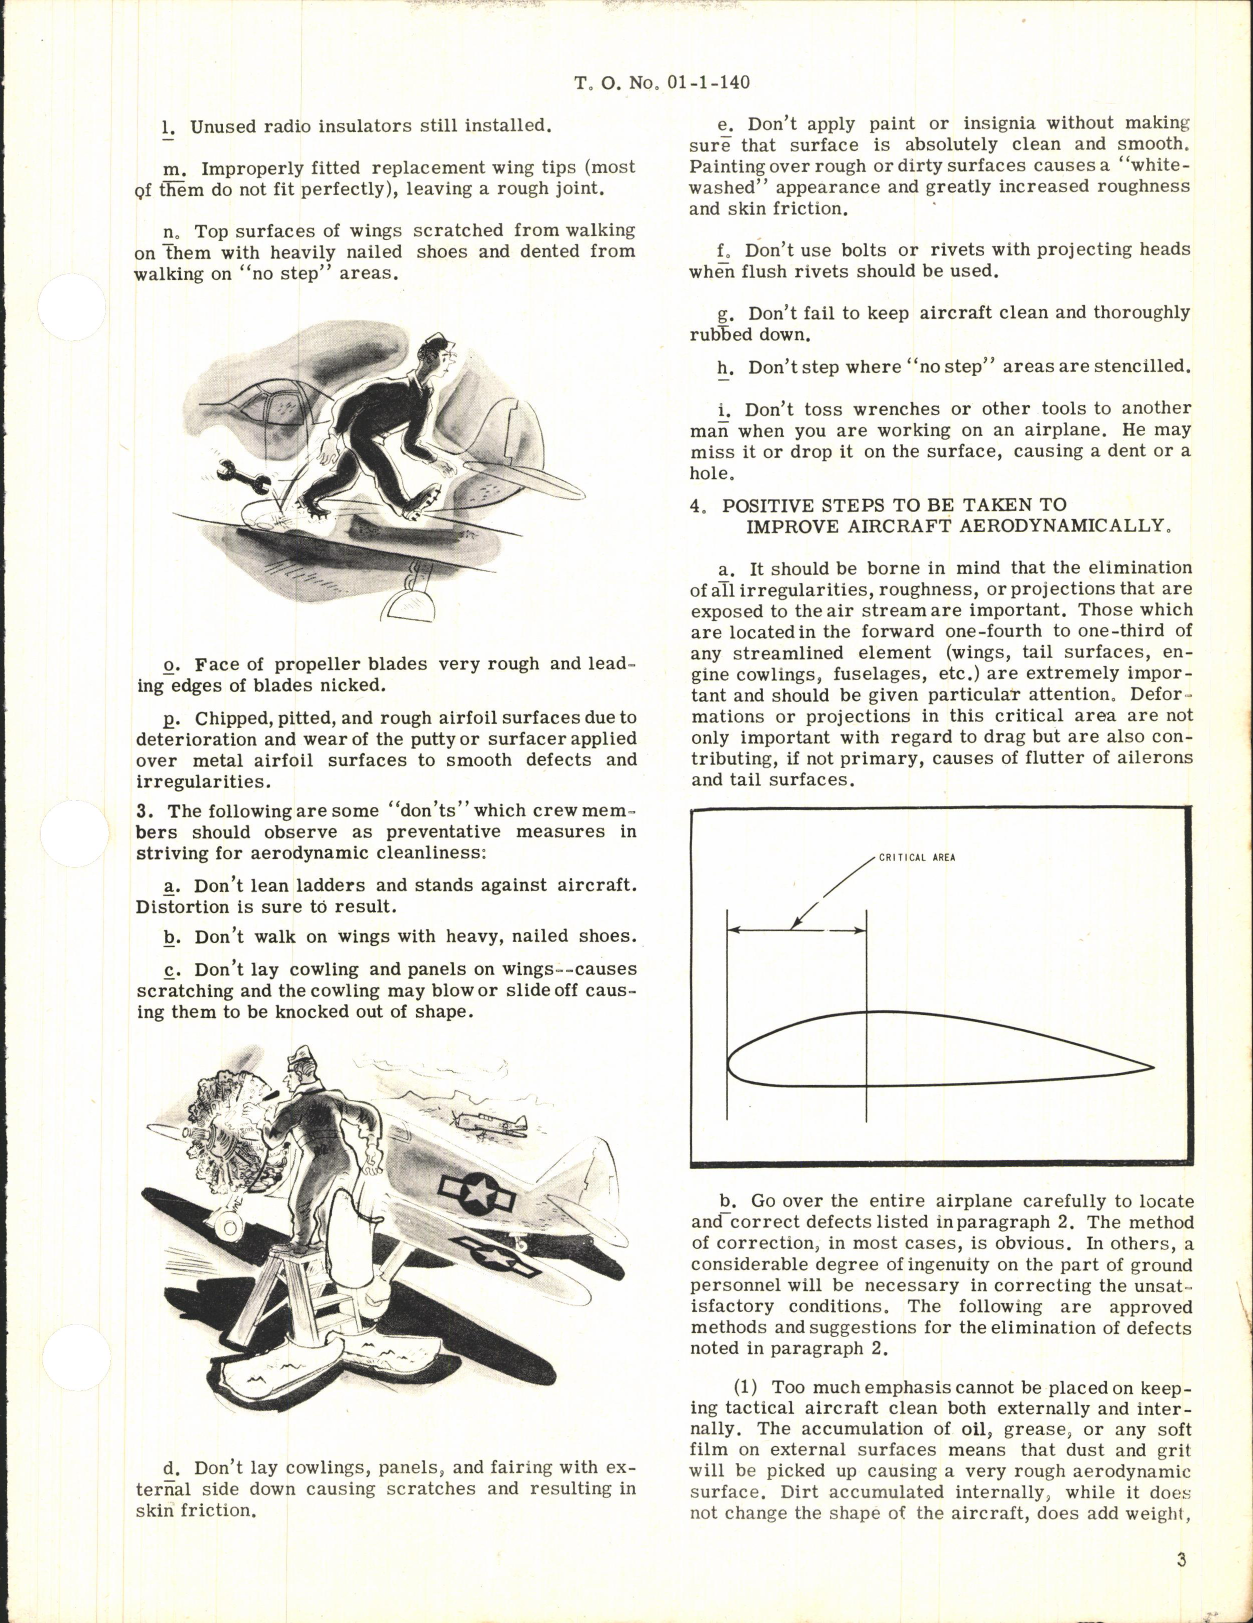 Sample page 3 from AirCorps Library document: Airplanes and Maintenance Parts; Aerodynamic Maintenance of Aircraft